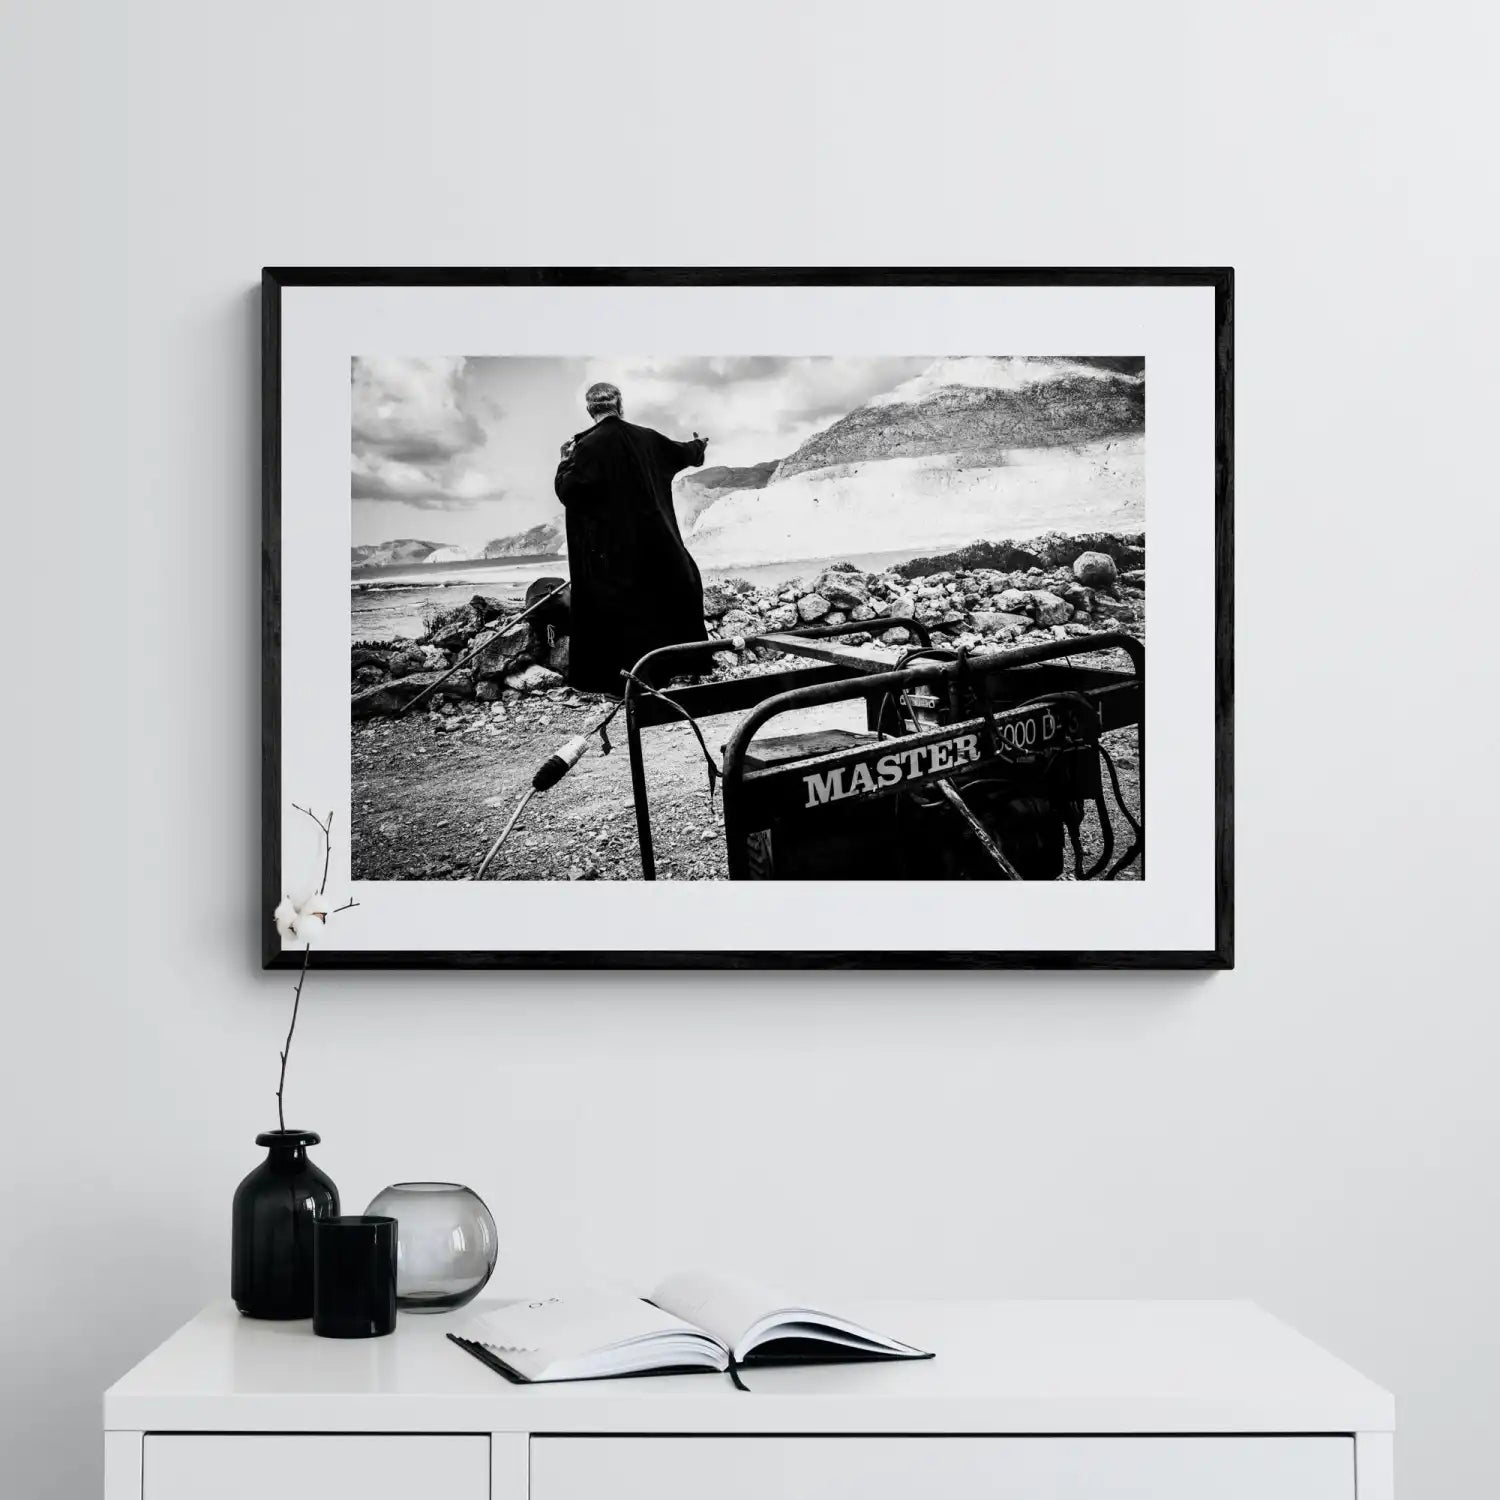 Black and White Photography Wall Art Greece | Priest at the St. John celebration in Vrykounta Olympos Karpathos Dodecanese by George Tatakis - single framed photo